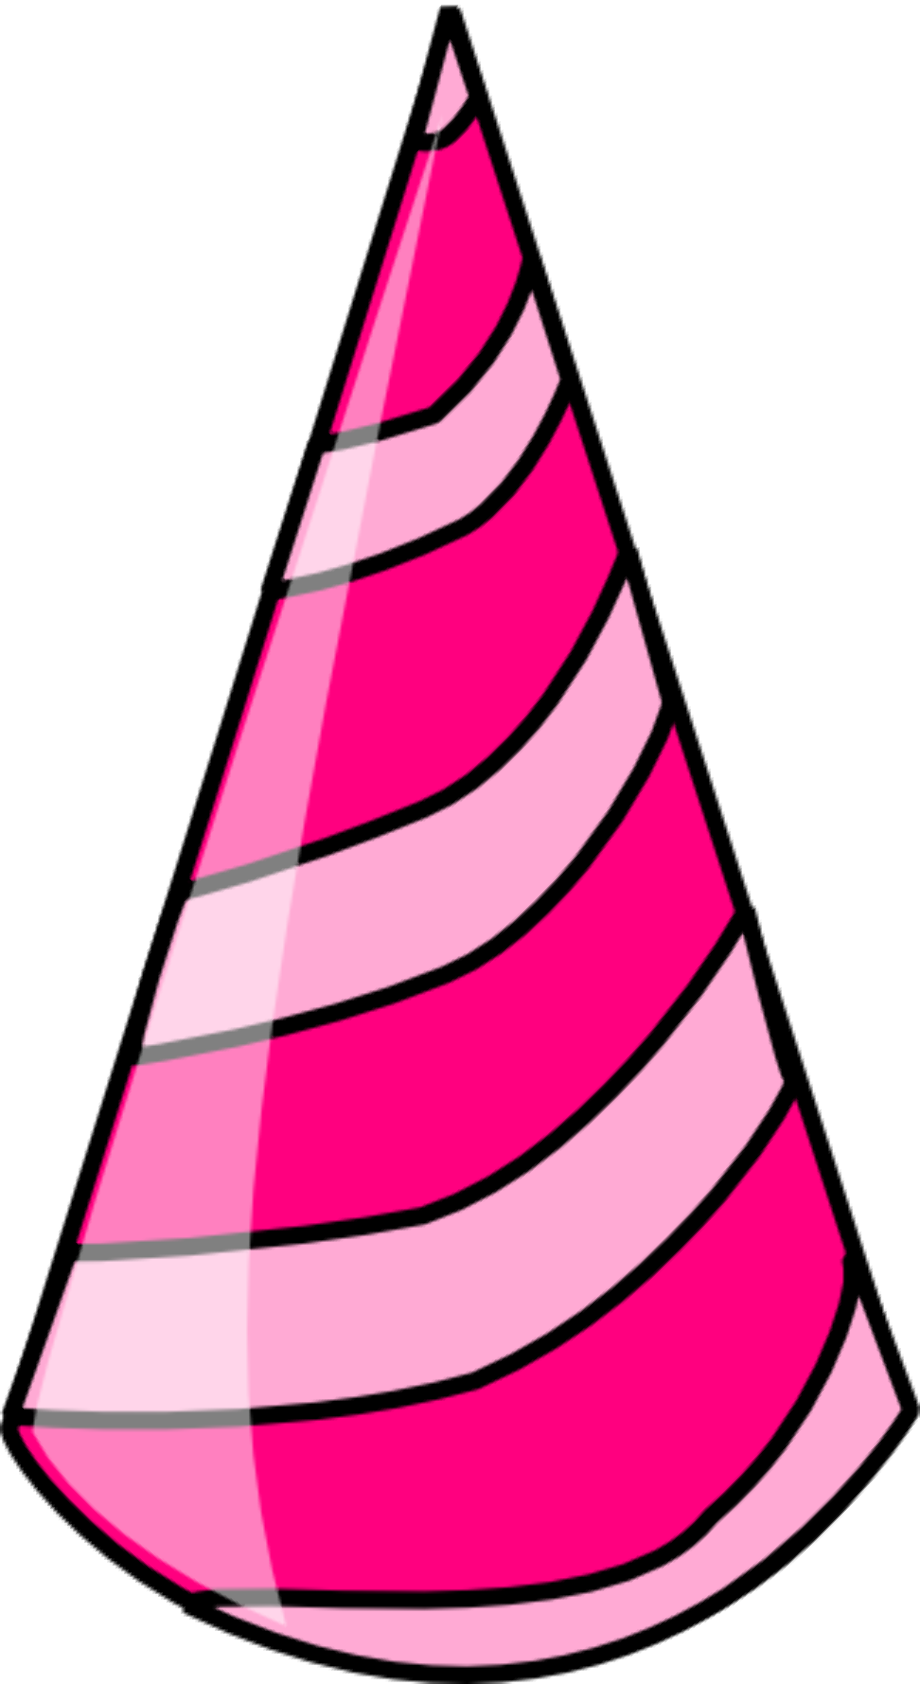 Download High Quality birthday hat clipart pink Transparent PNG Images